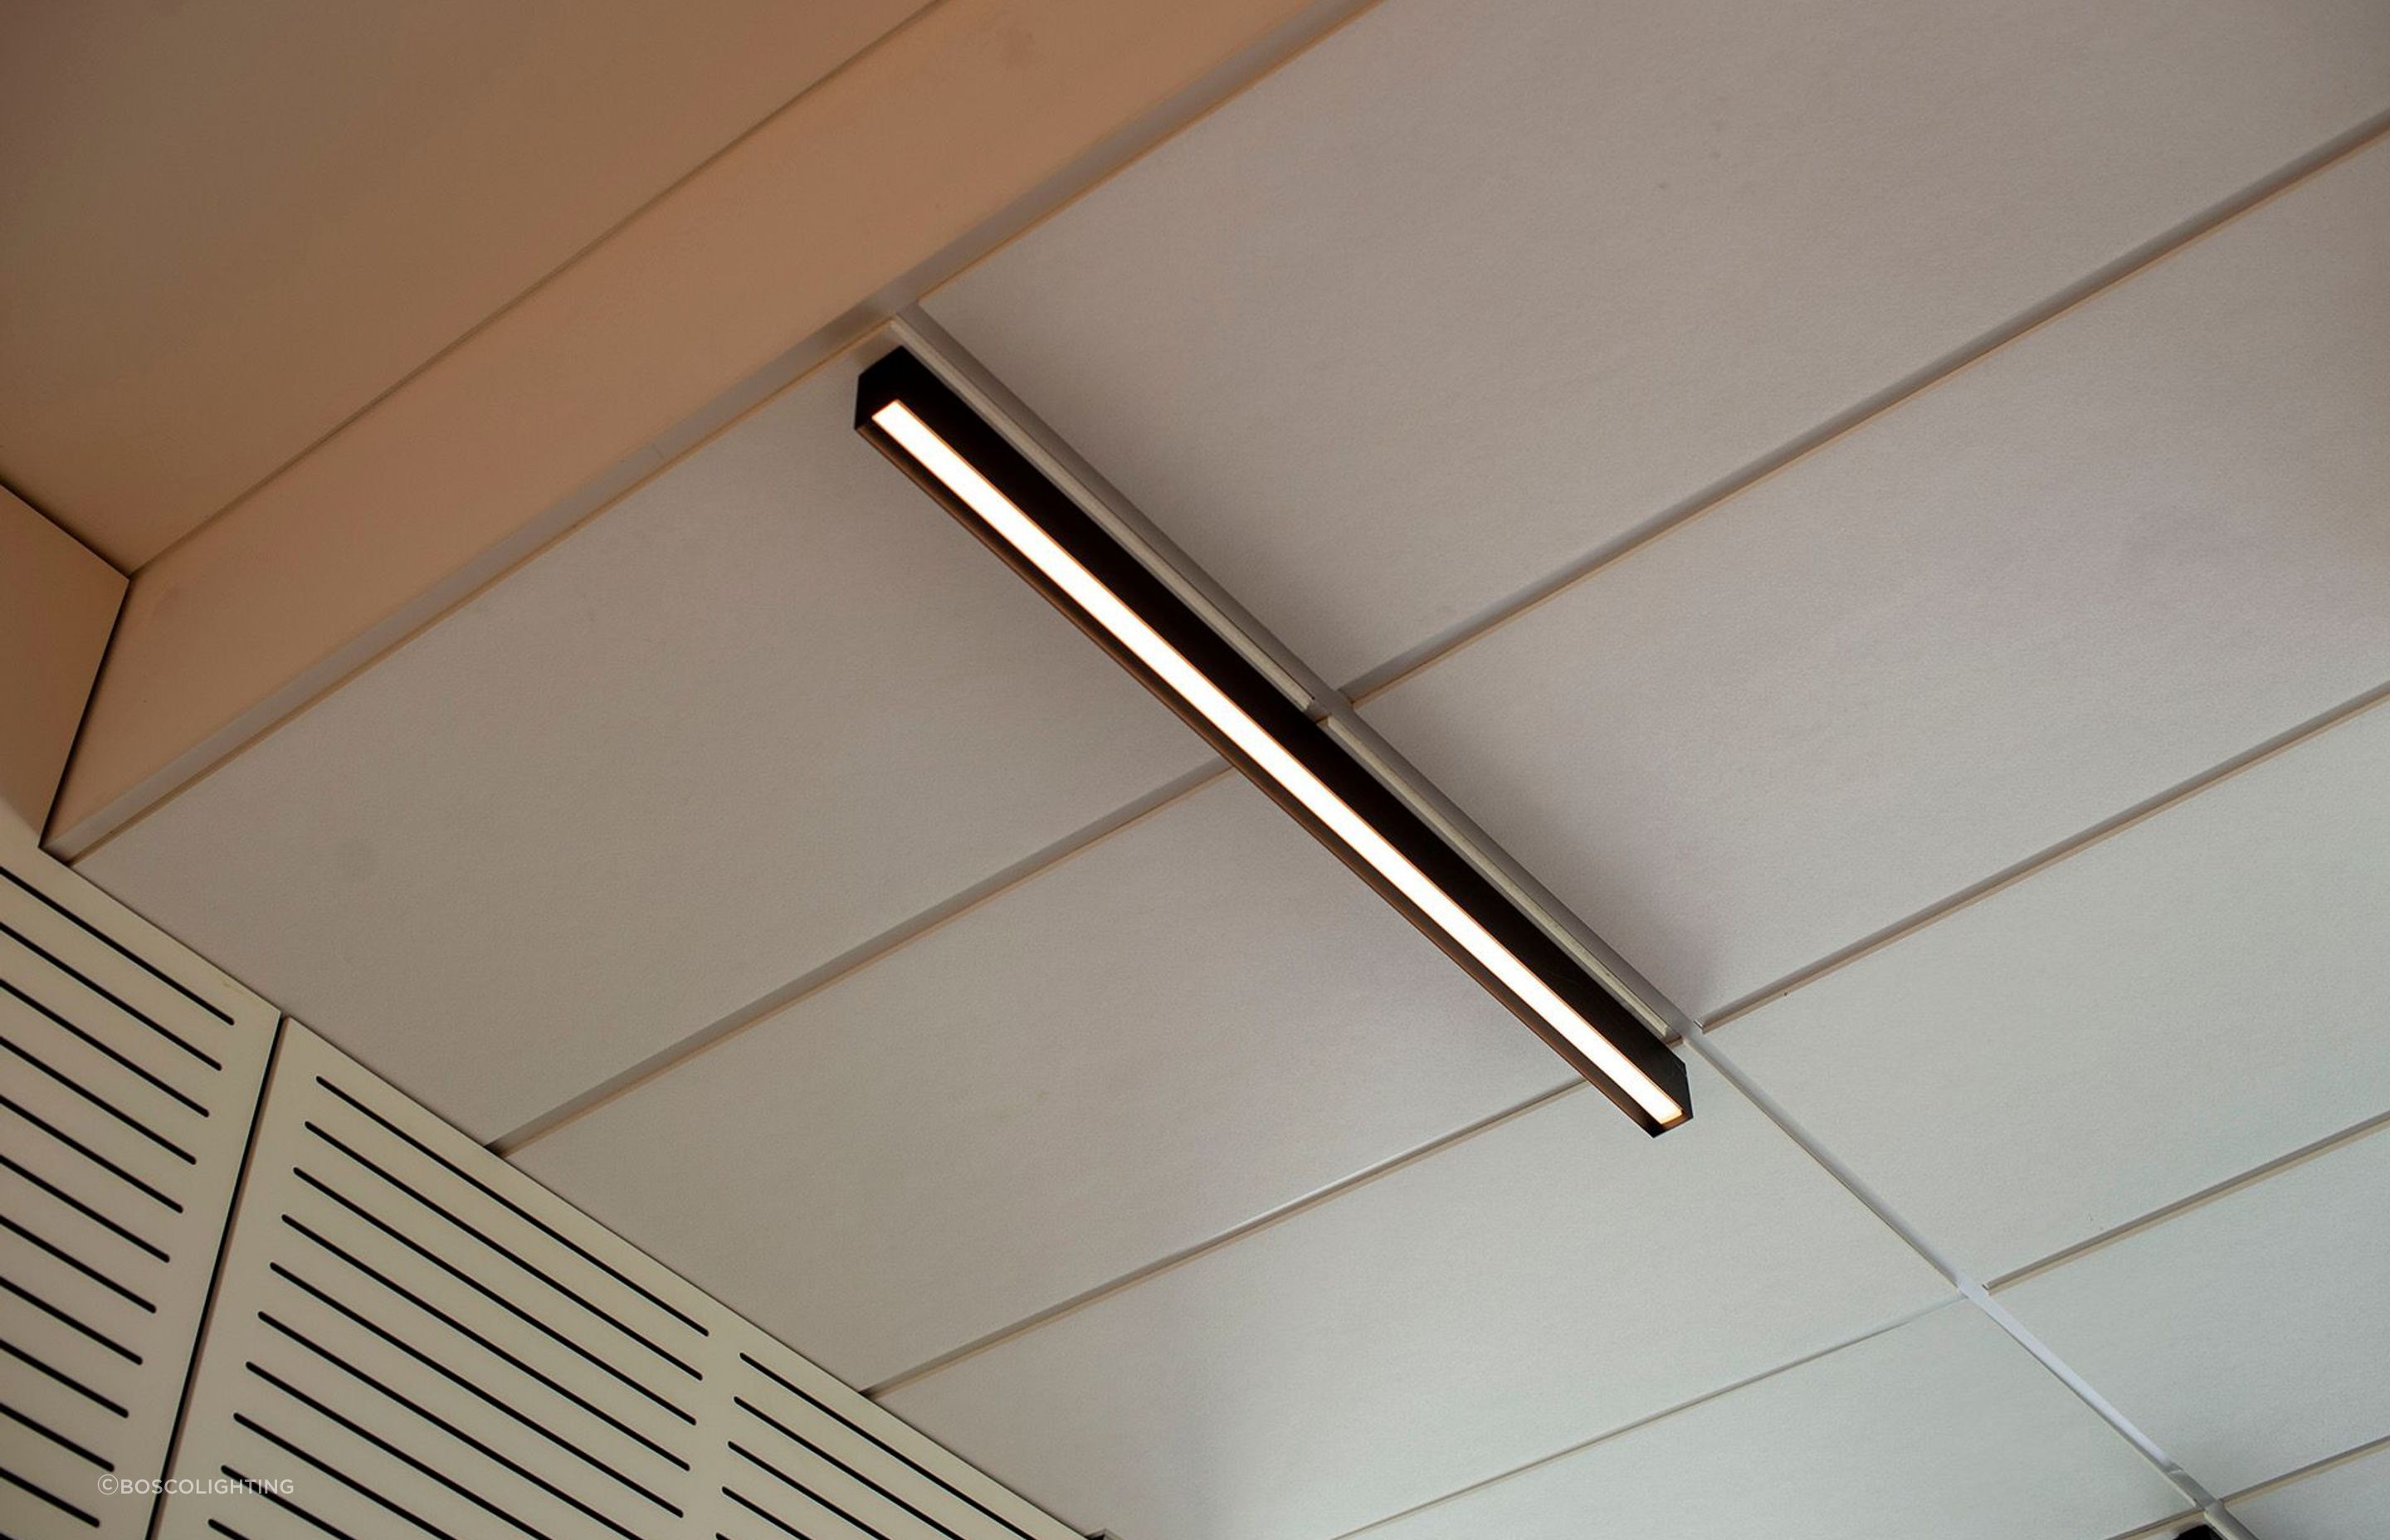 Linear Extrusion Lighting by BoscoLighting